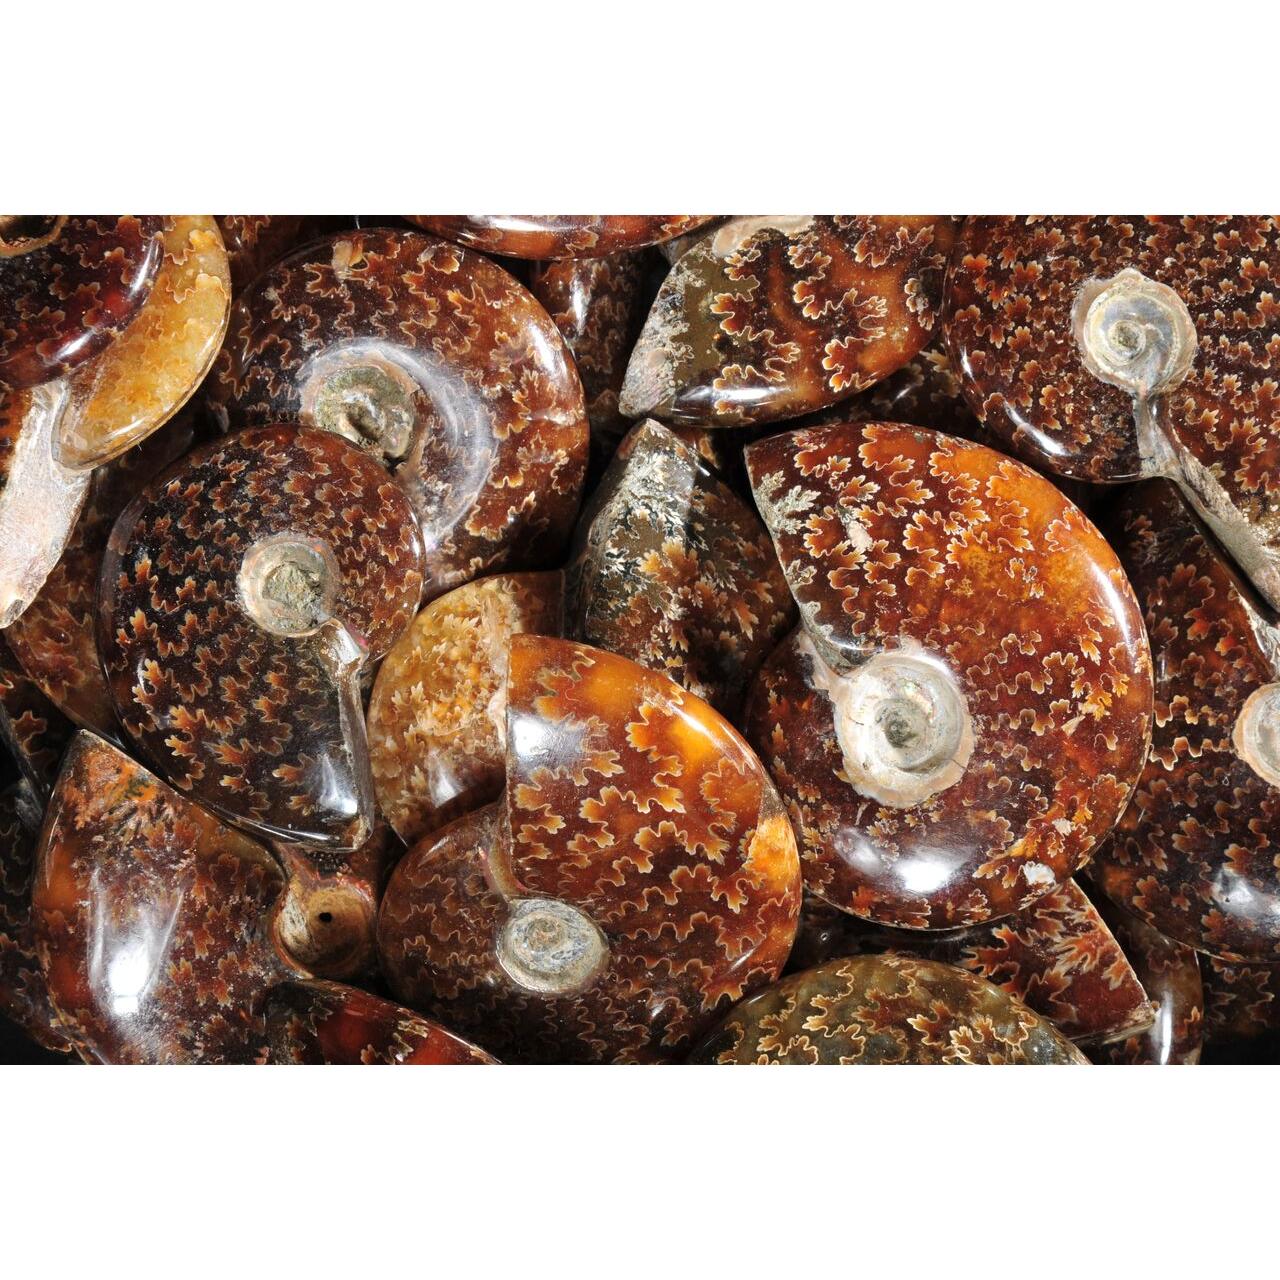 This is a picture of a lot of shiny, colorful, caramel-colored ammonites populating the entire picture.